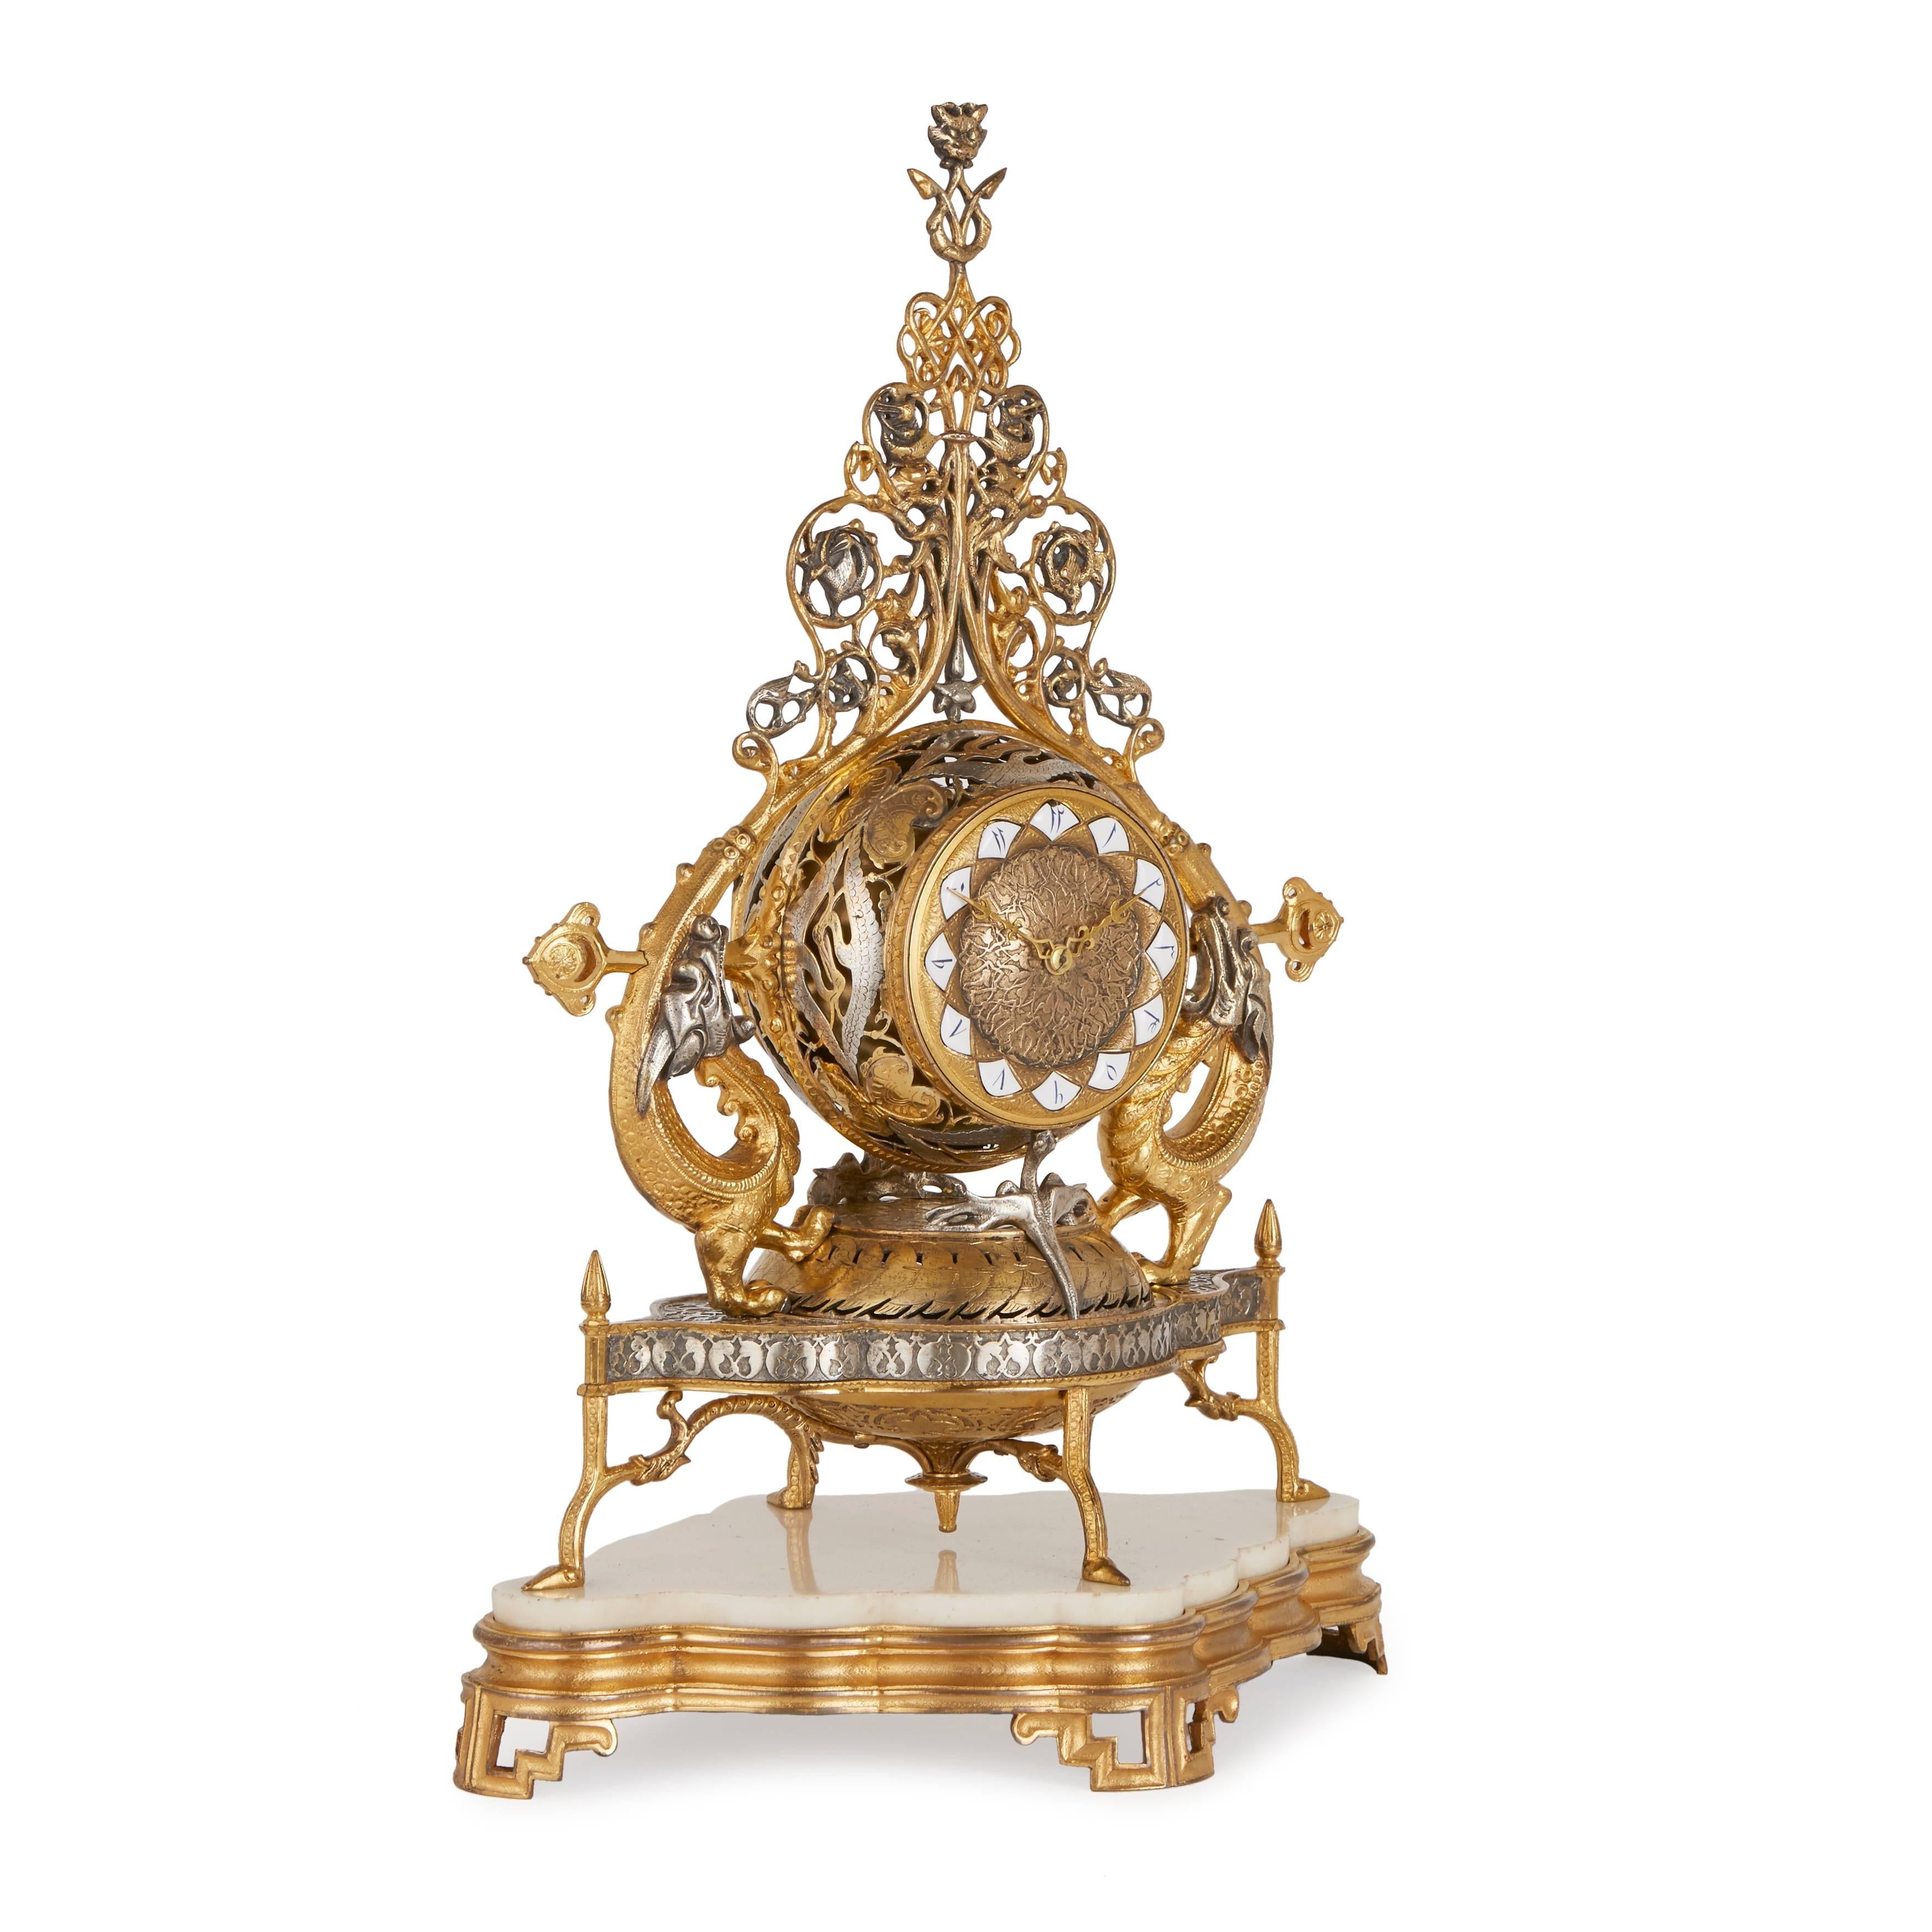 French Napoleon III period marble, silvered and gilt bronze clock set